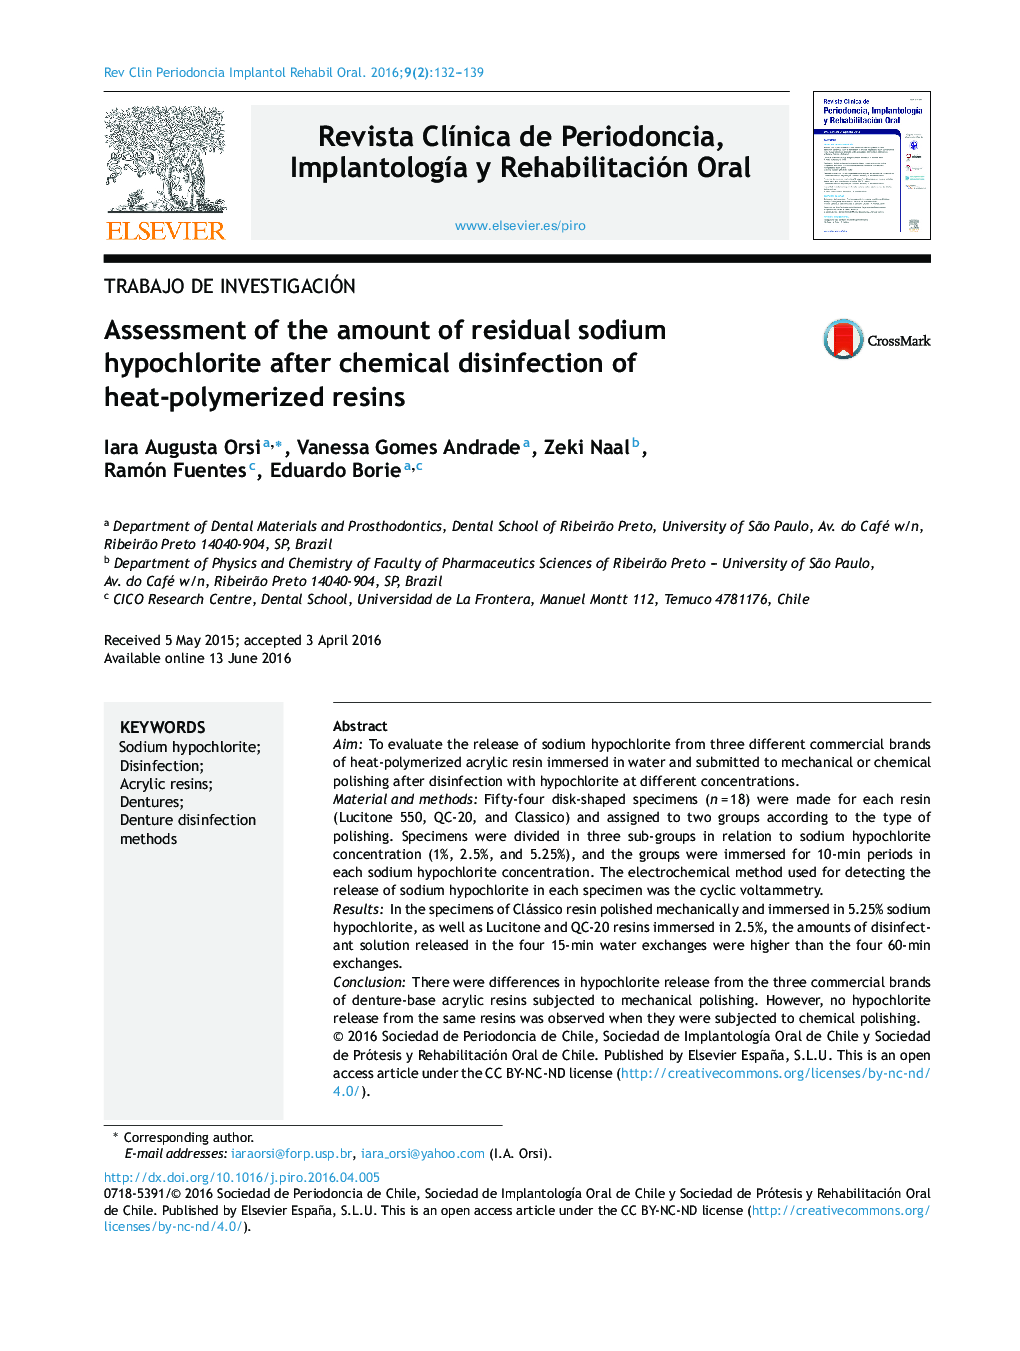 Assessment of the amount of residual sodium hypochlorite after chemical disinfection of heat-polymerized resins